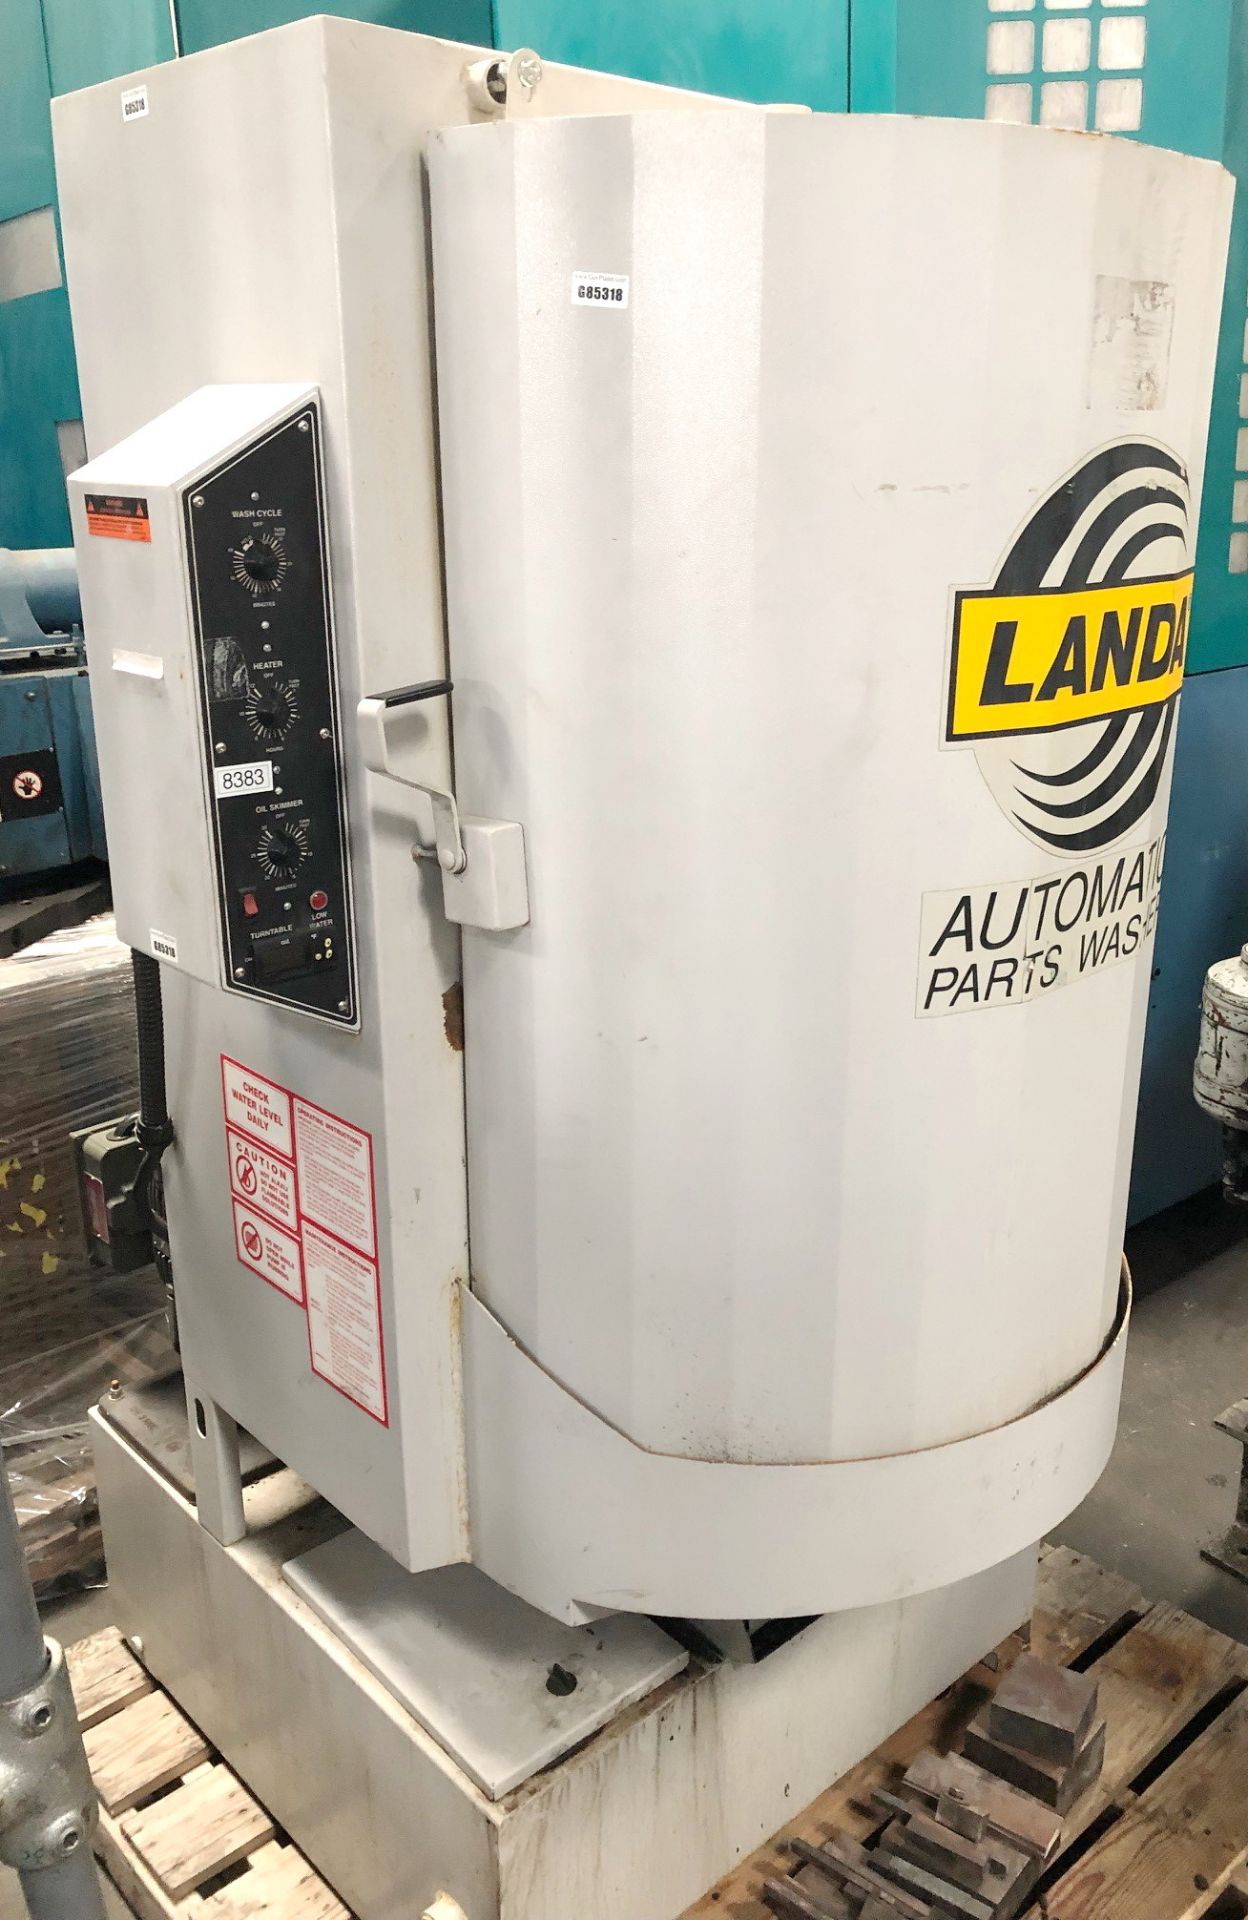 2009 Landa Front Loading Heated Parts Washer | 28" x 40", Located In: Huntington Park, CA - 8383HP